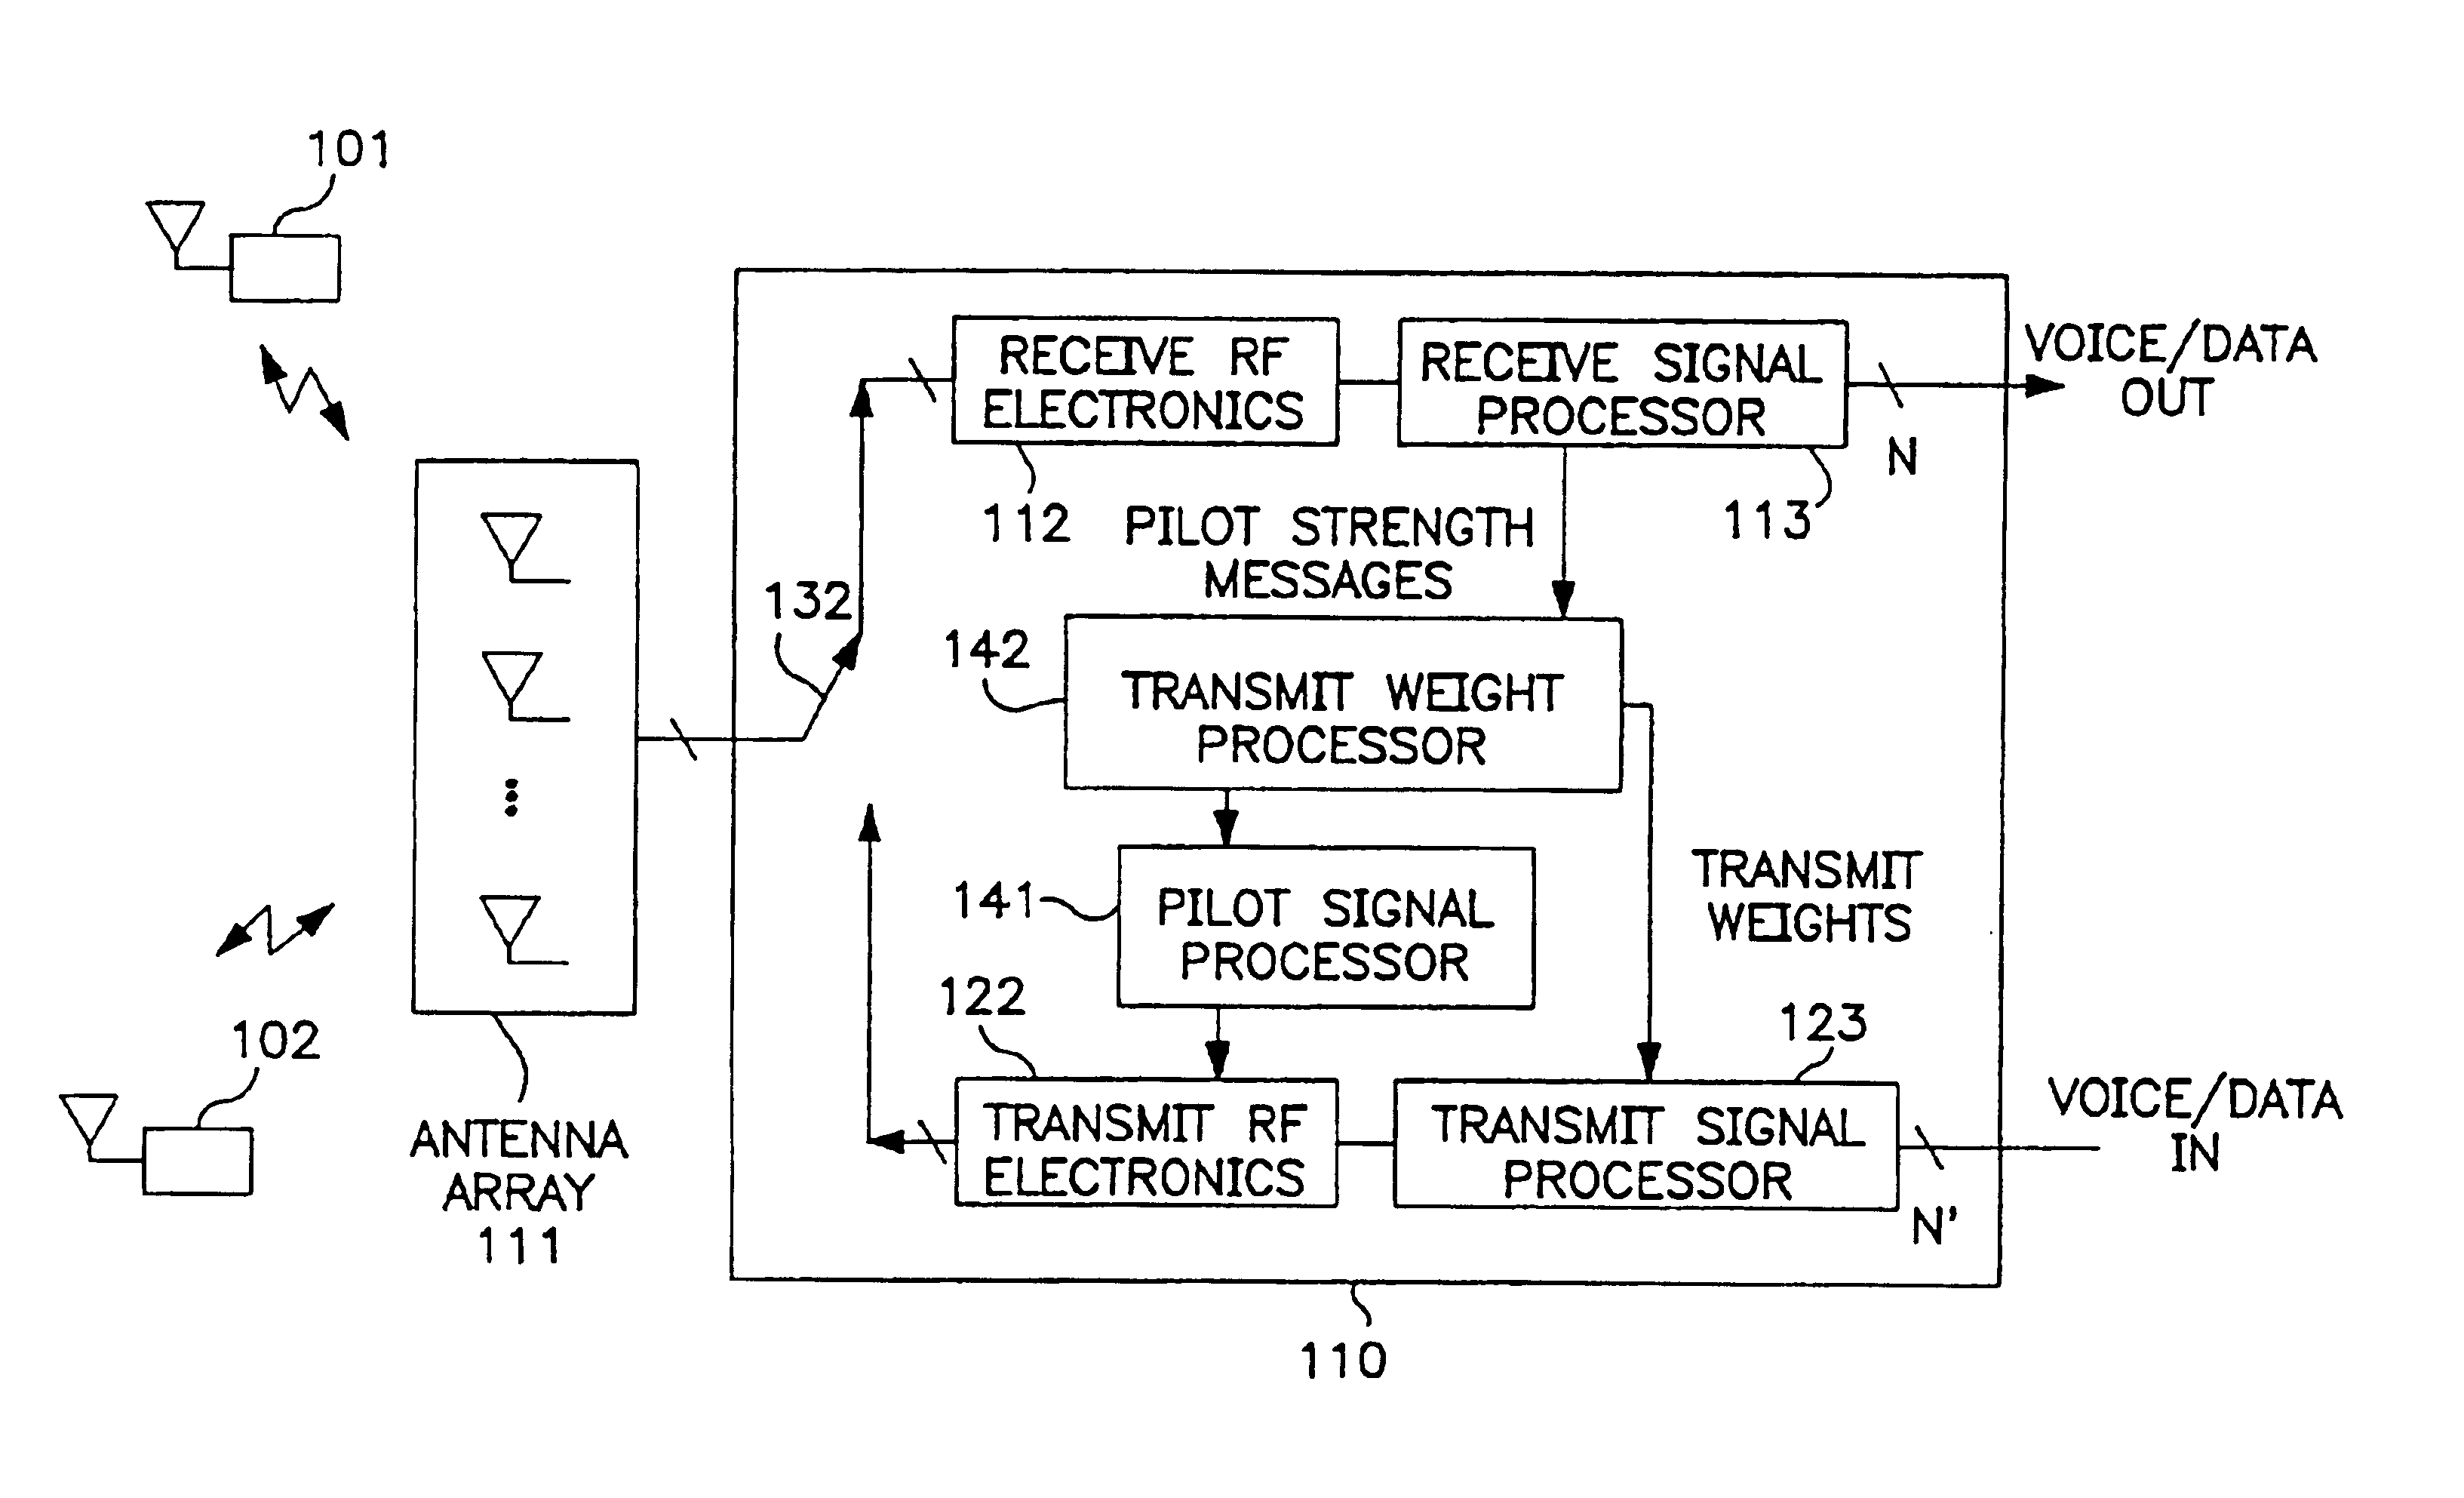 Downlink signal processing in CDMA systems utilizing arrays of antennae